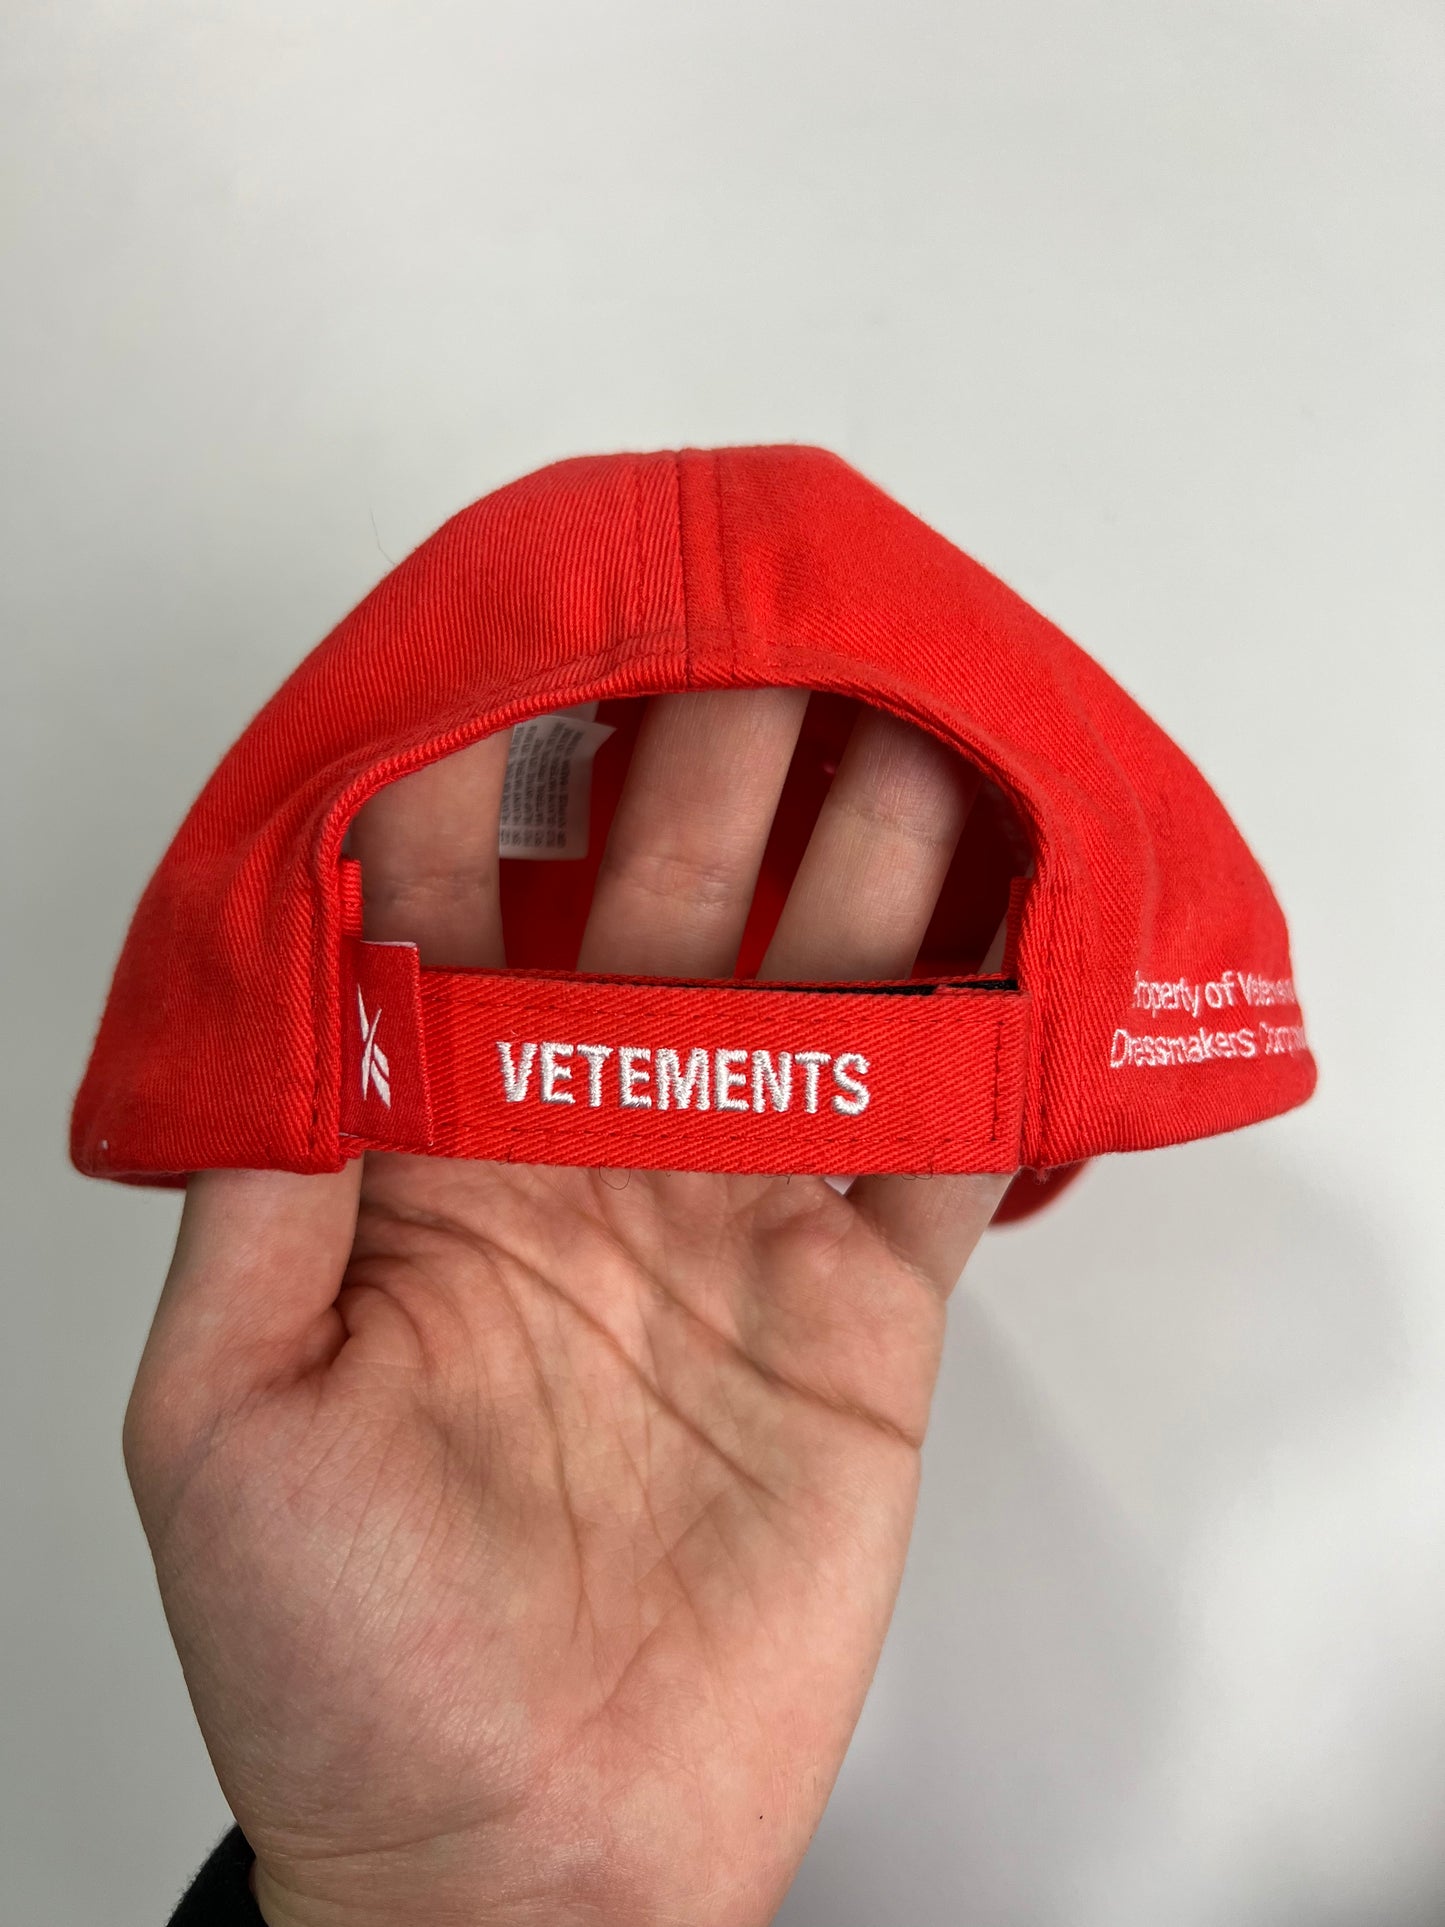 Vetements SS20 runway For Rent Cap Hat in red SZ:OS